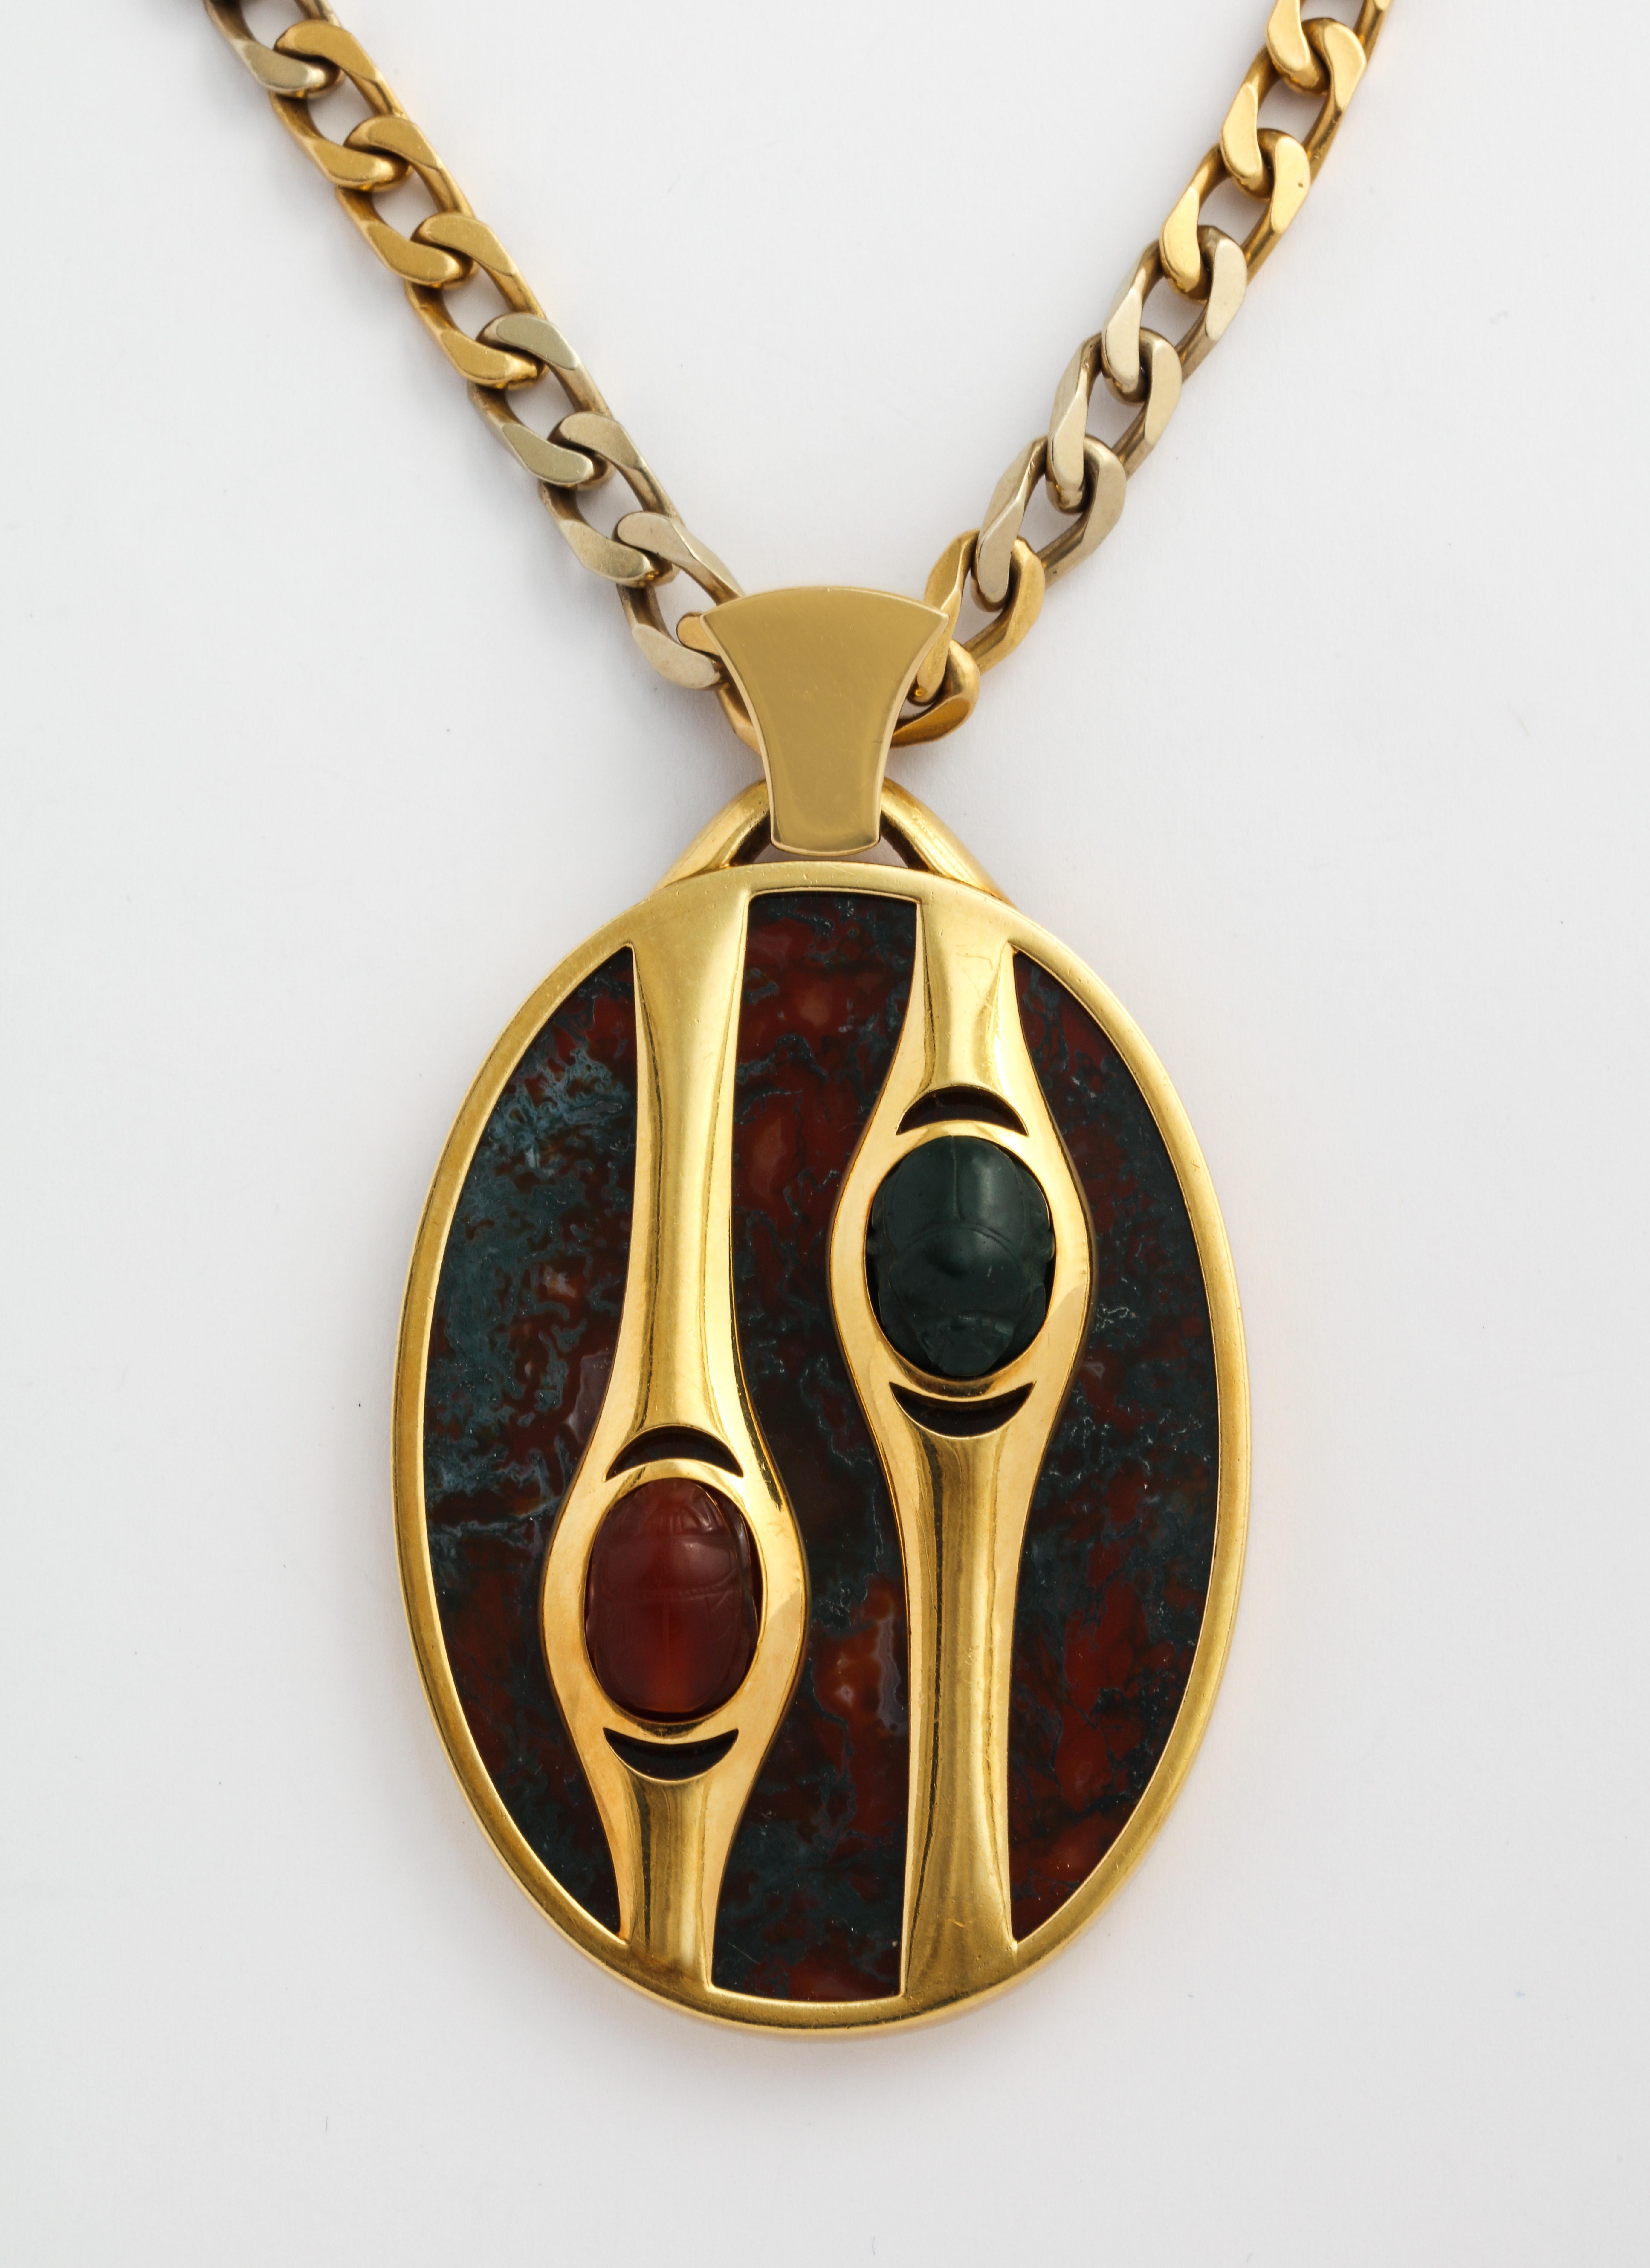 Bloodstone (Agate) plaque and matching carved scarabs hang from this 32